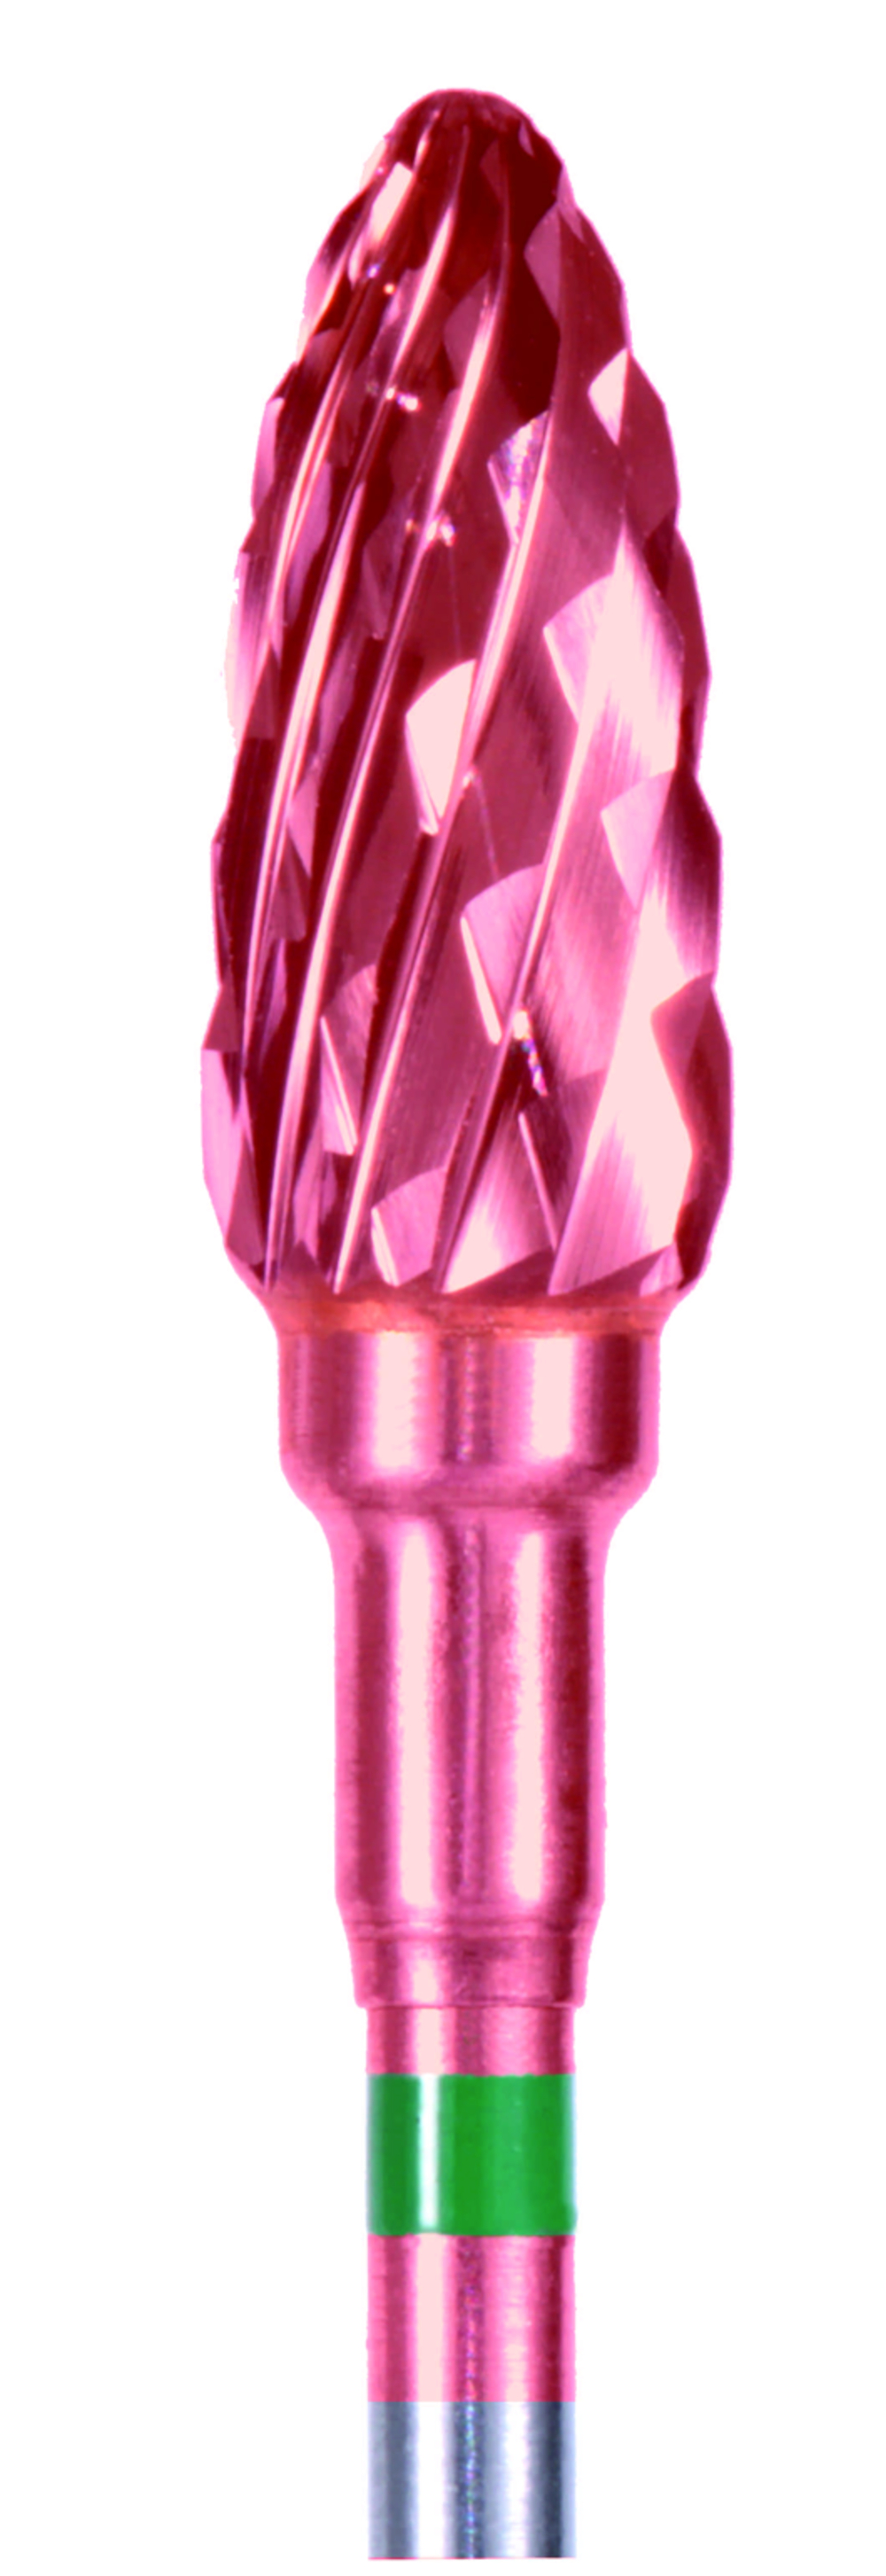 M+W SELECT Red Milling Cutter